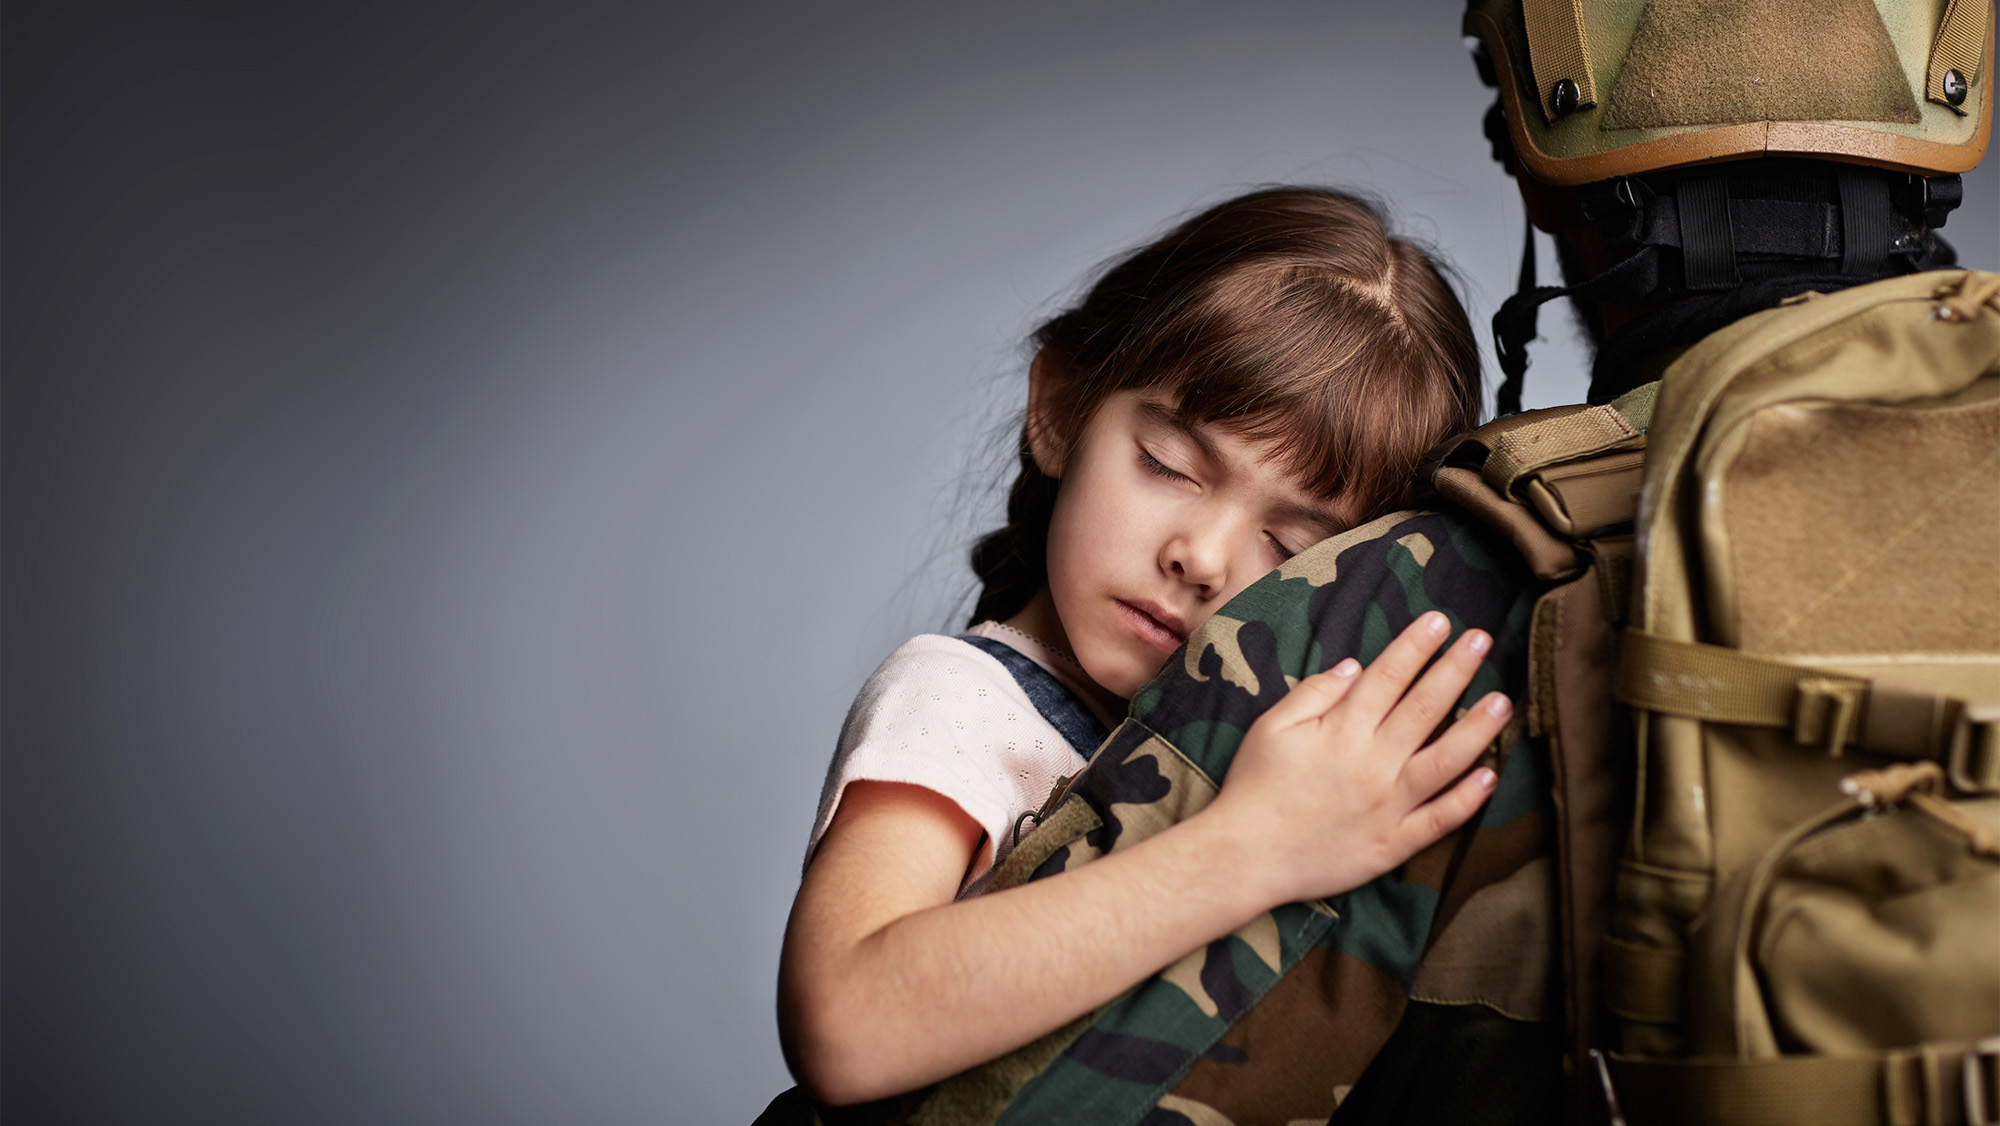 A young girls hugs a person in military fatigues